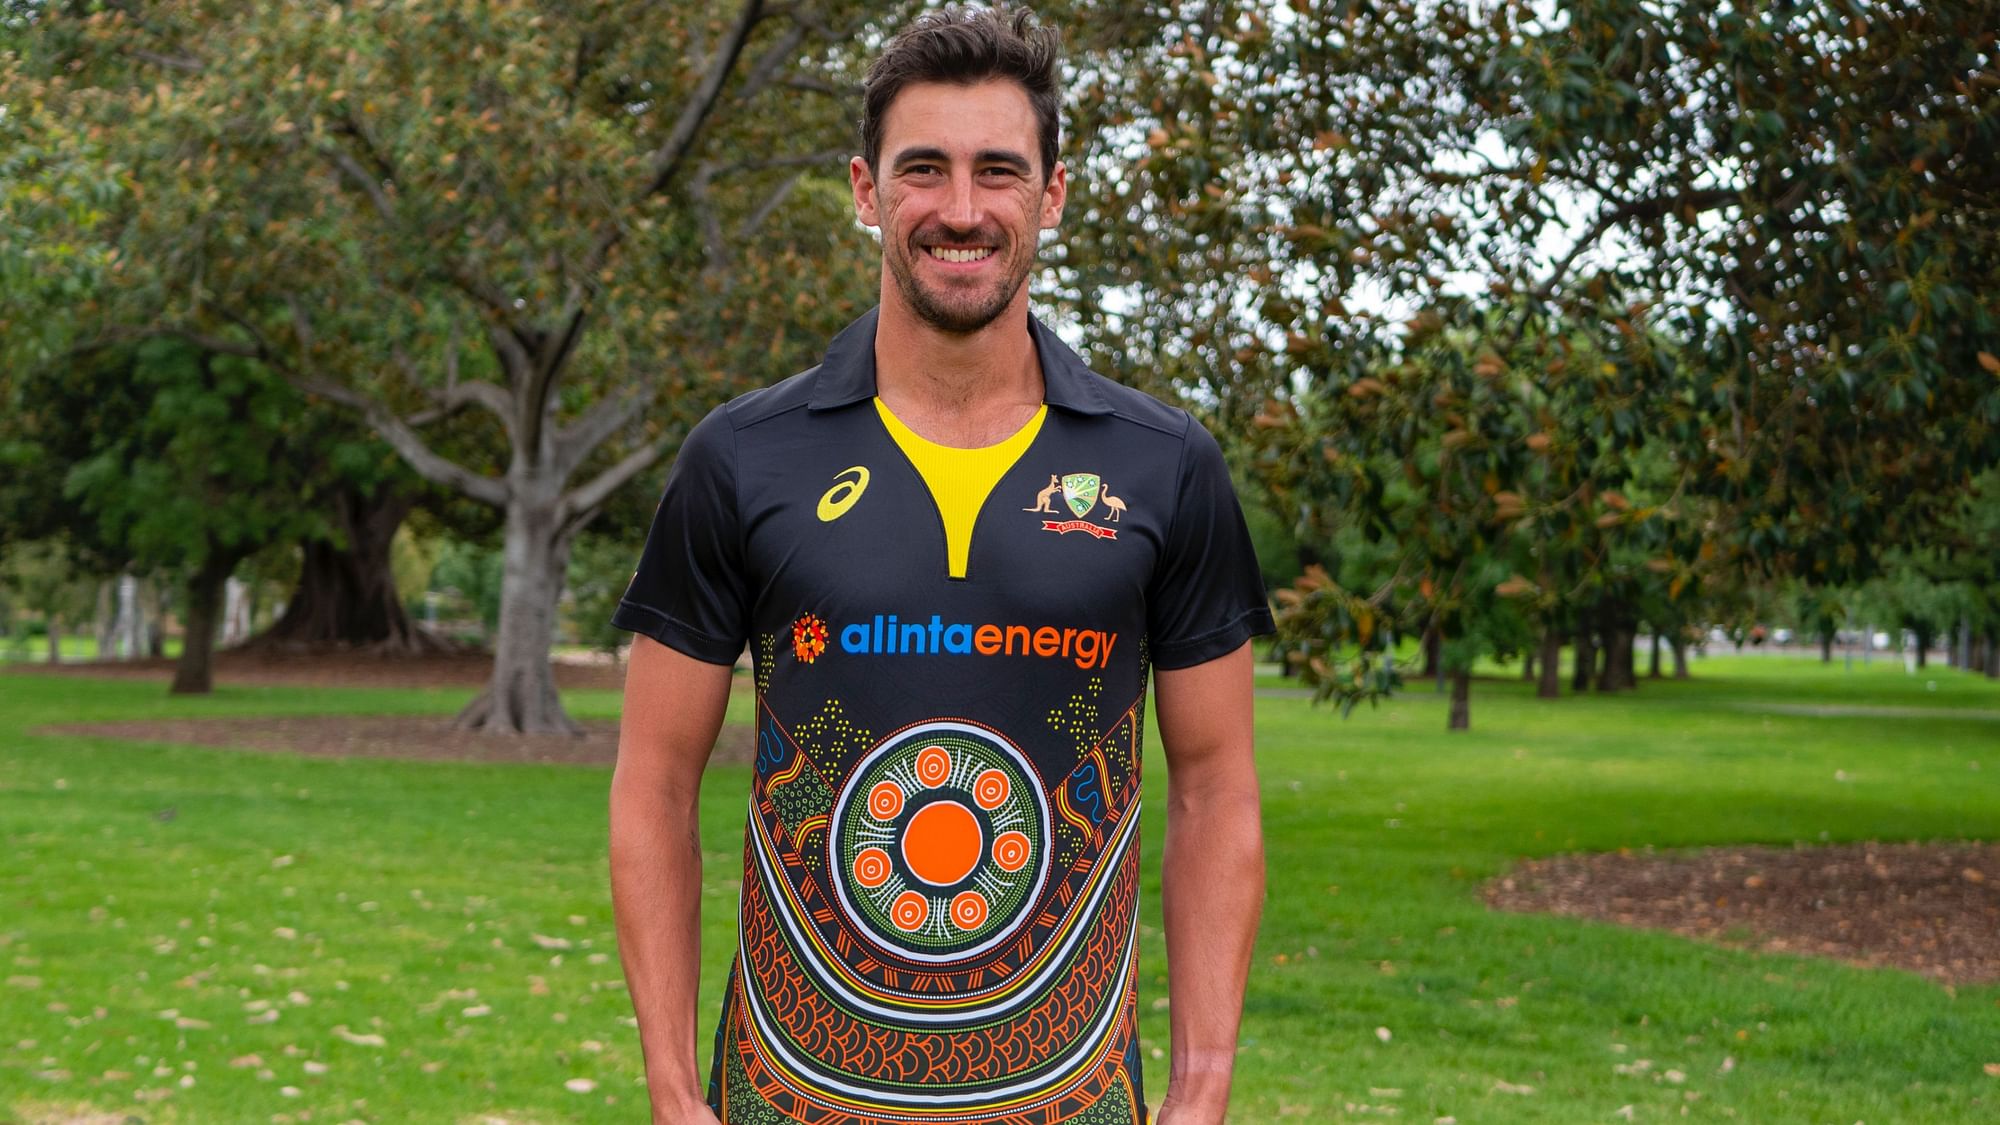 Australian fast bowler Mitchell Starc during the photoshoot wearing the indigenous jersey.